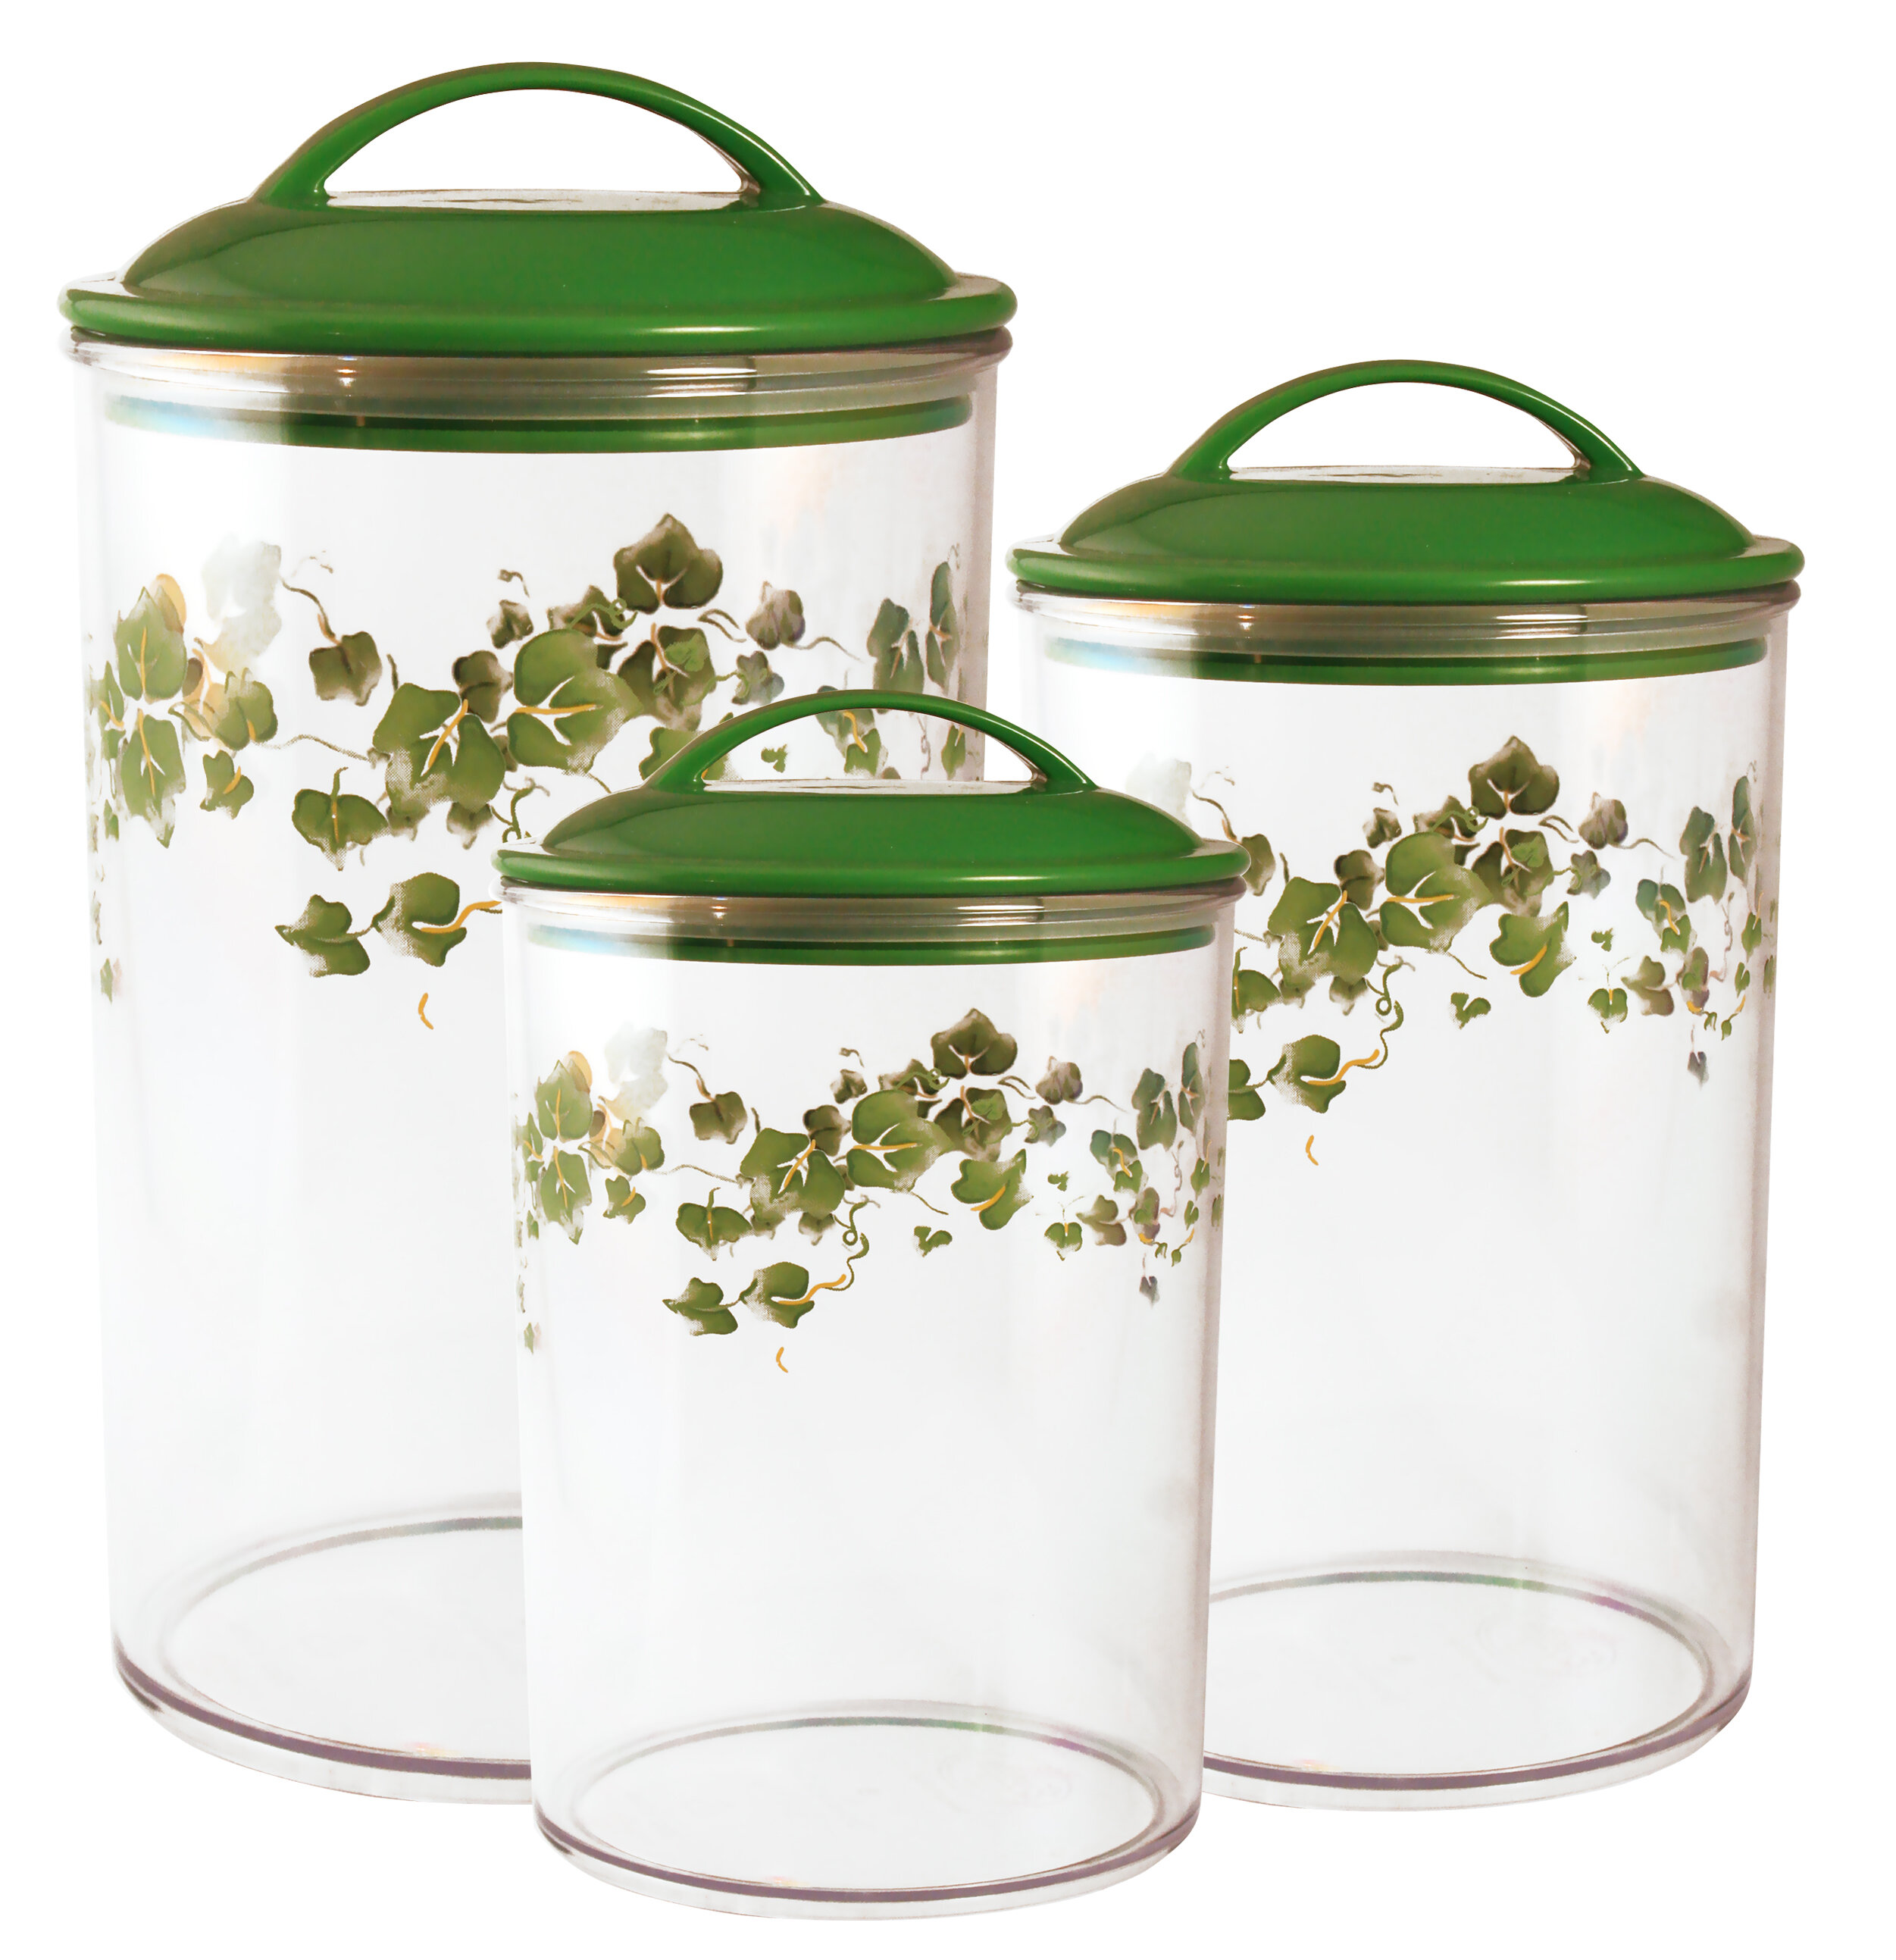 Luxury lime green kitchen canisters Lime Green Canisters Set Of 3 Kitchen New Storage Tea Coffee Sugar Jars Enamel Home Garden Worldenergy Ae